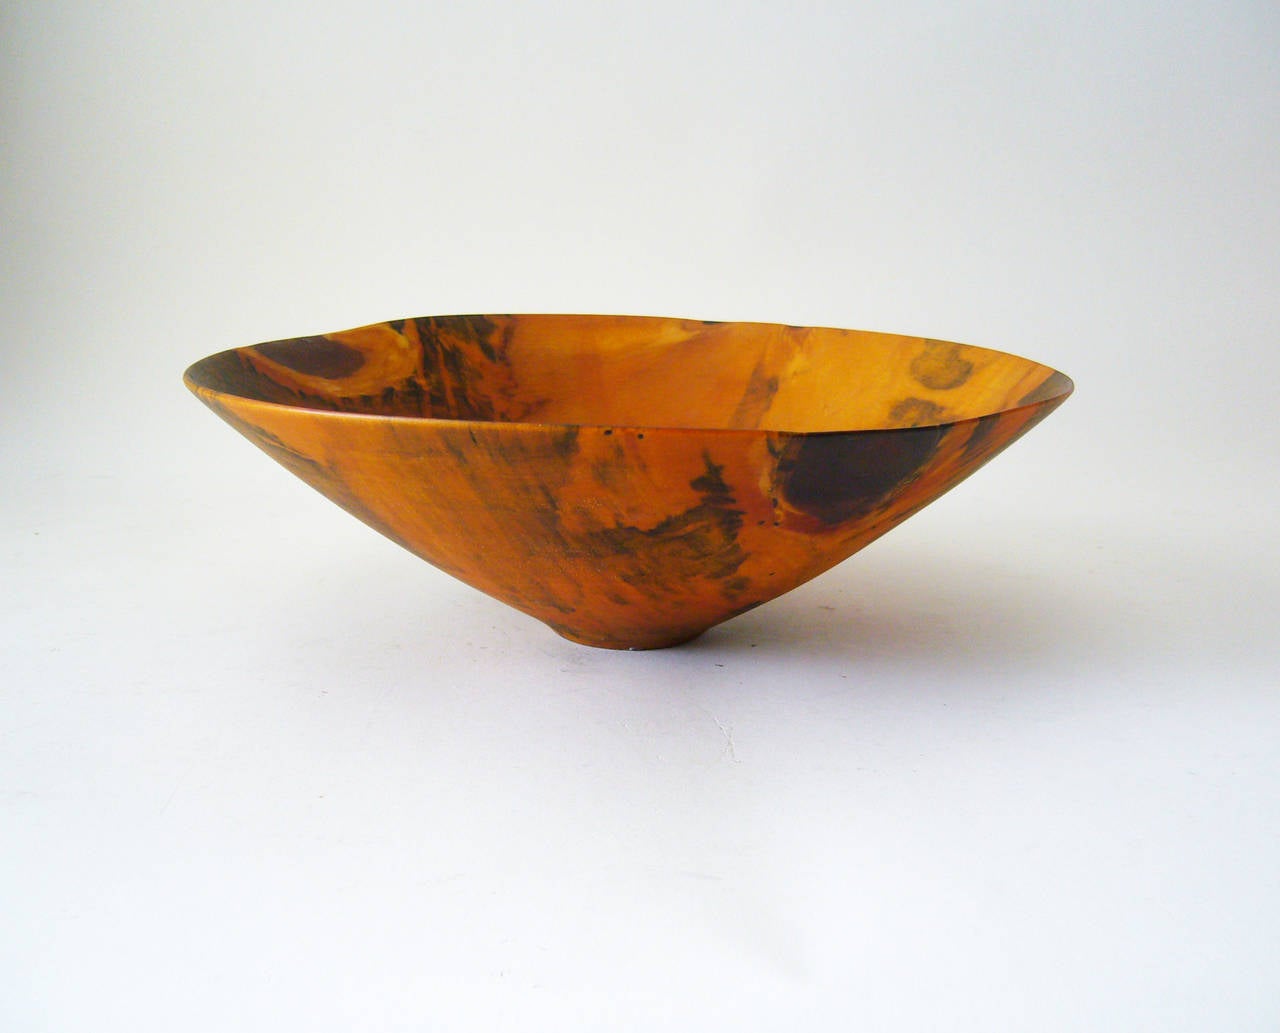 A hand turned pinewood bowl created by master wood artist Ron Kent of Honolulu, Hawaii. Bowl measures 3.25